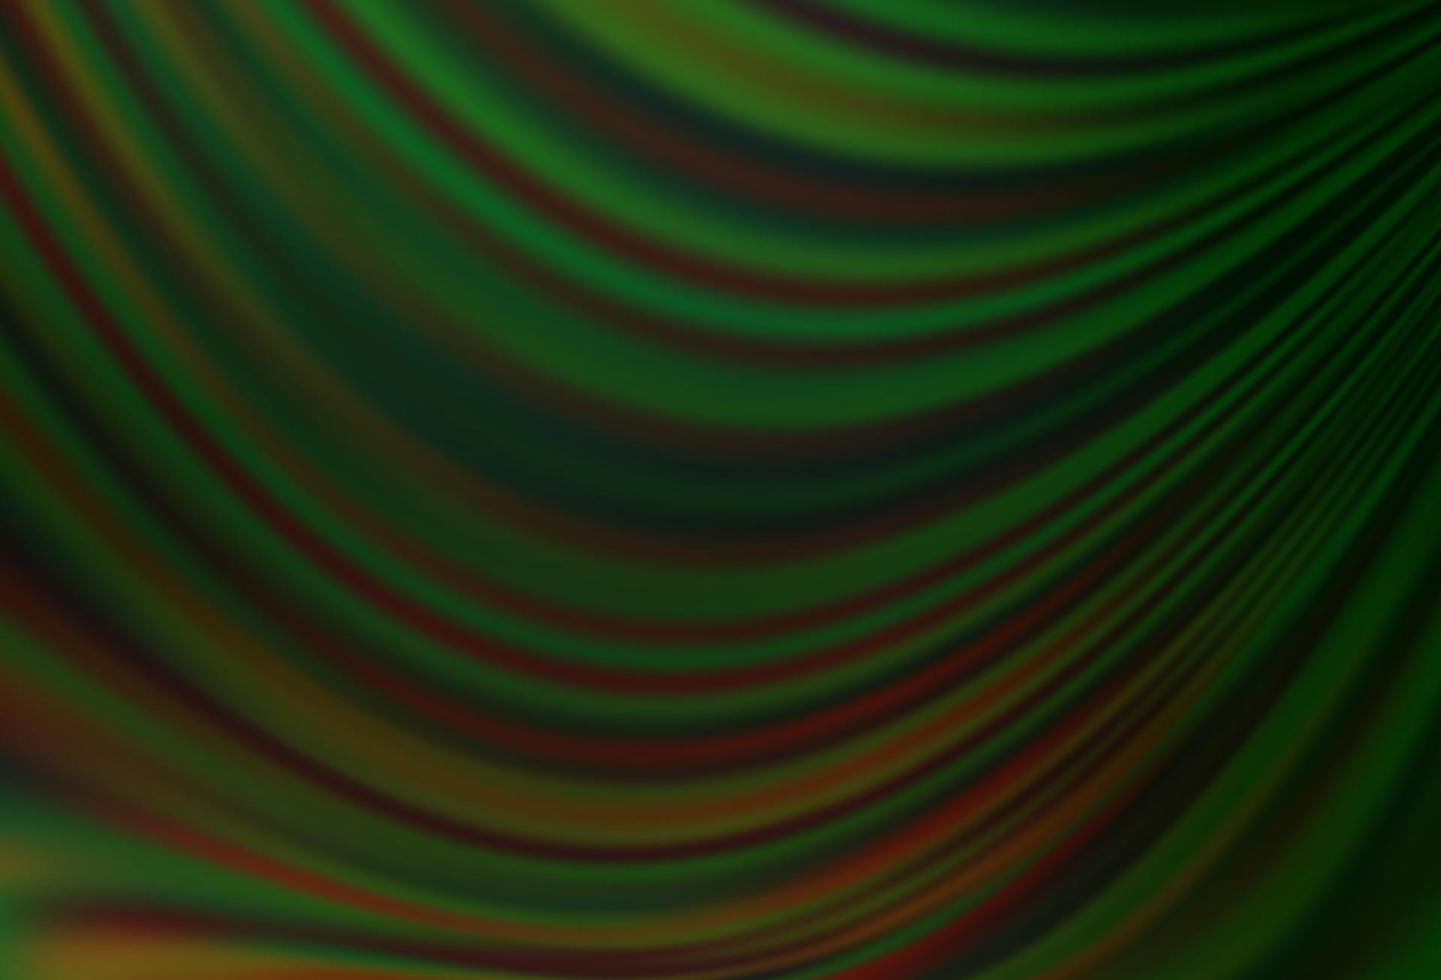 Dark Green vector template with liquid shapes.